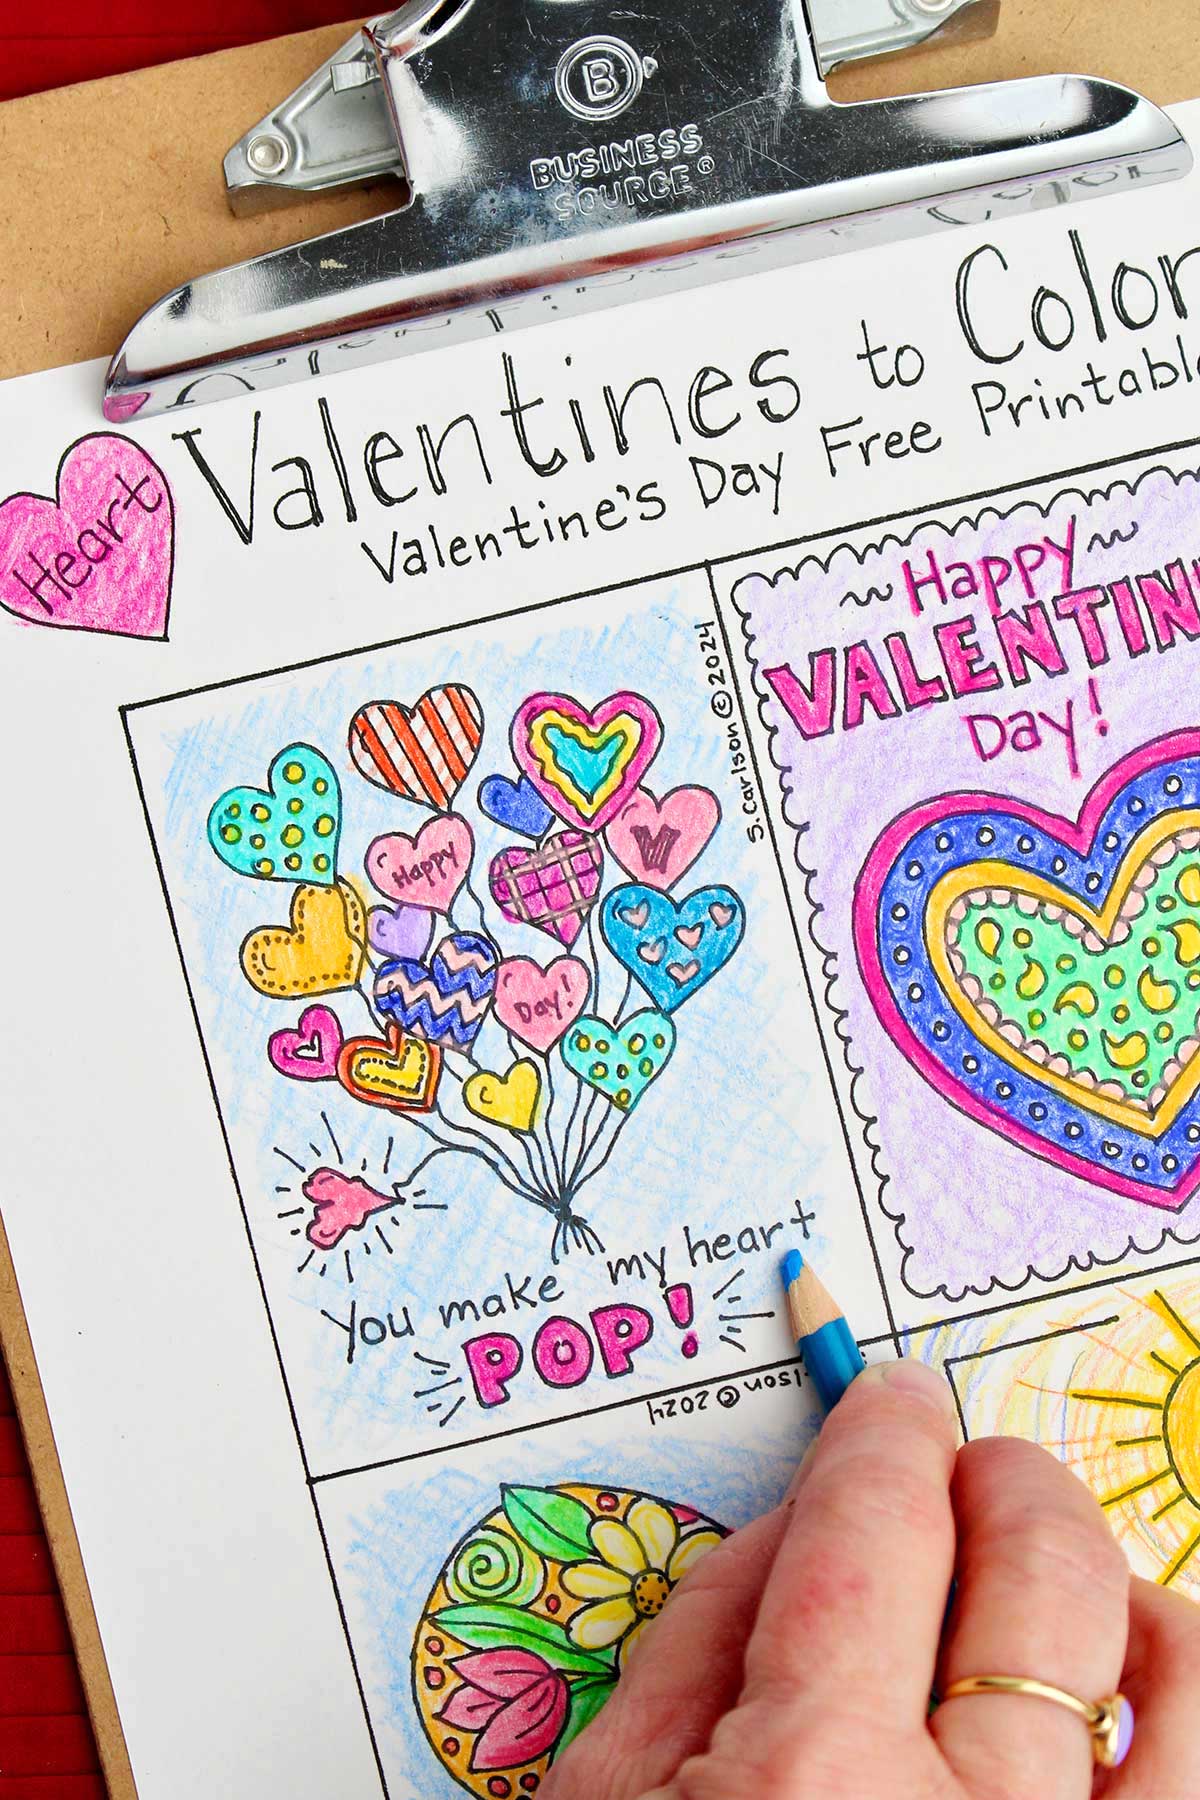 Hand using blue colored pencil to shade in background of Valentine saying "You make my heart POP!"